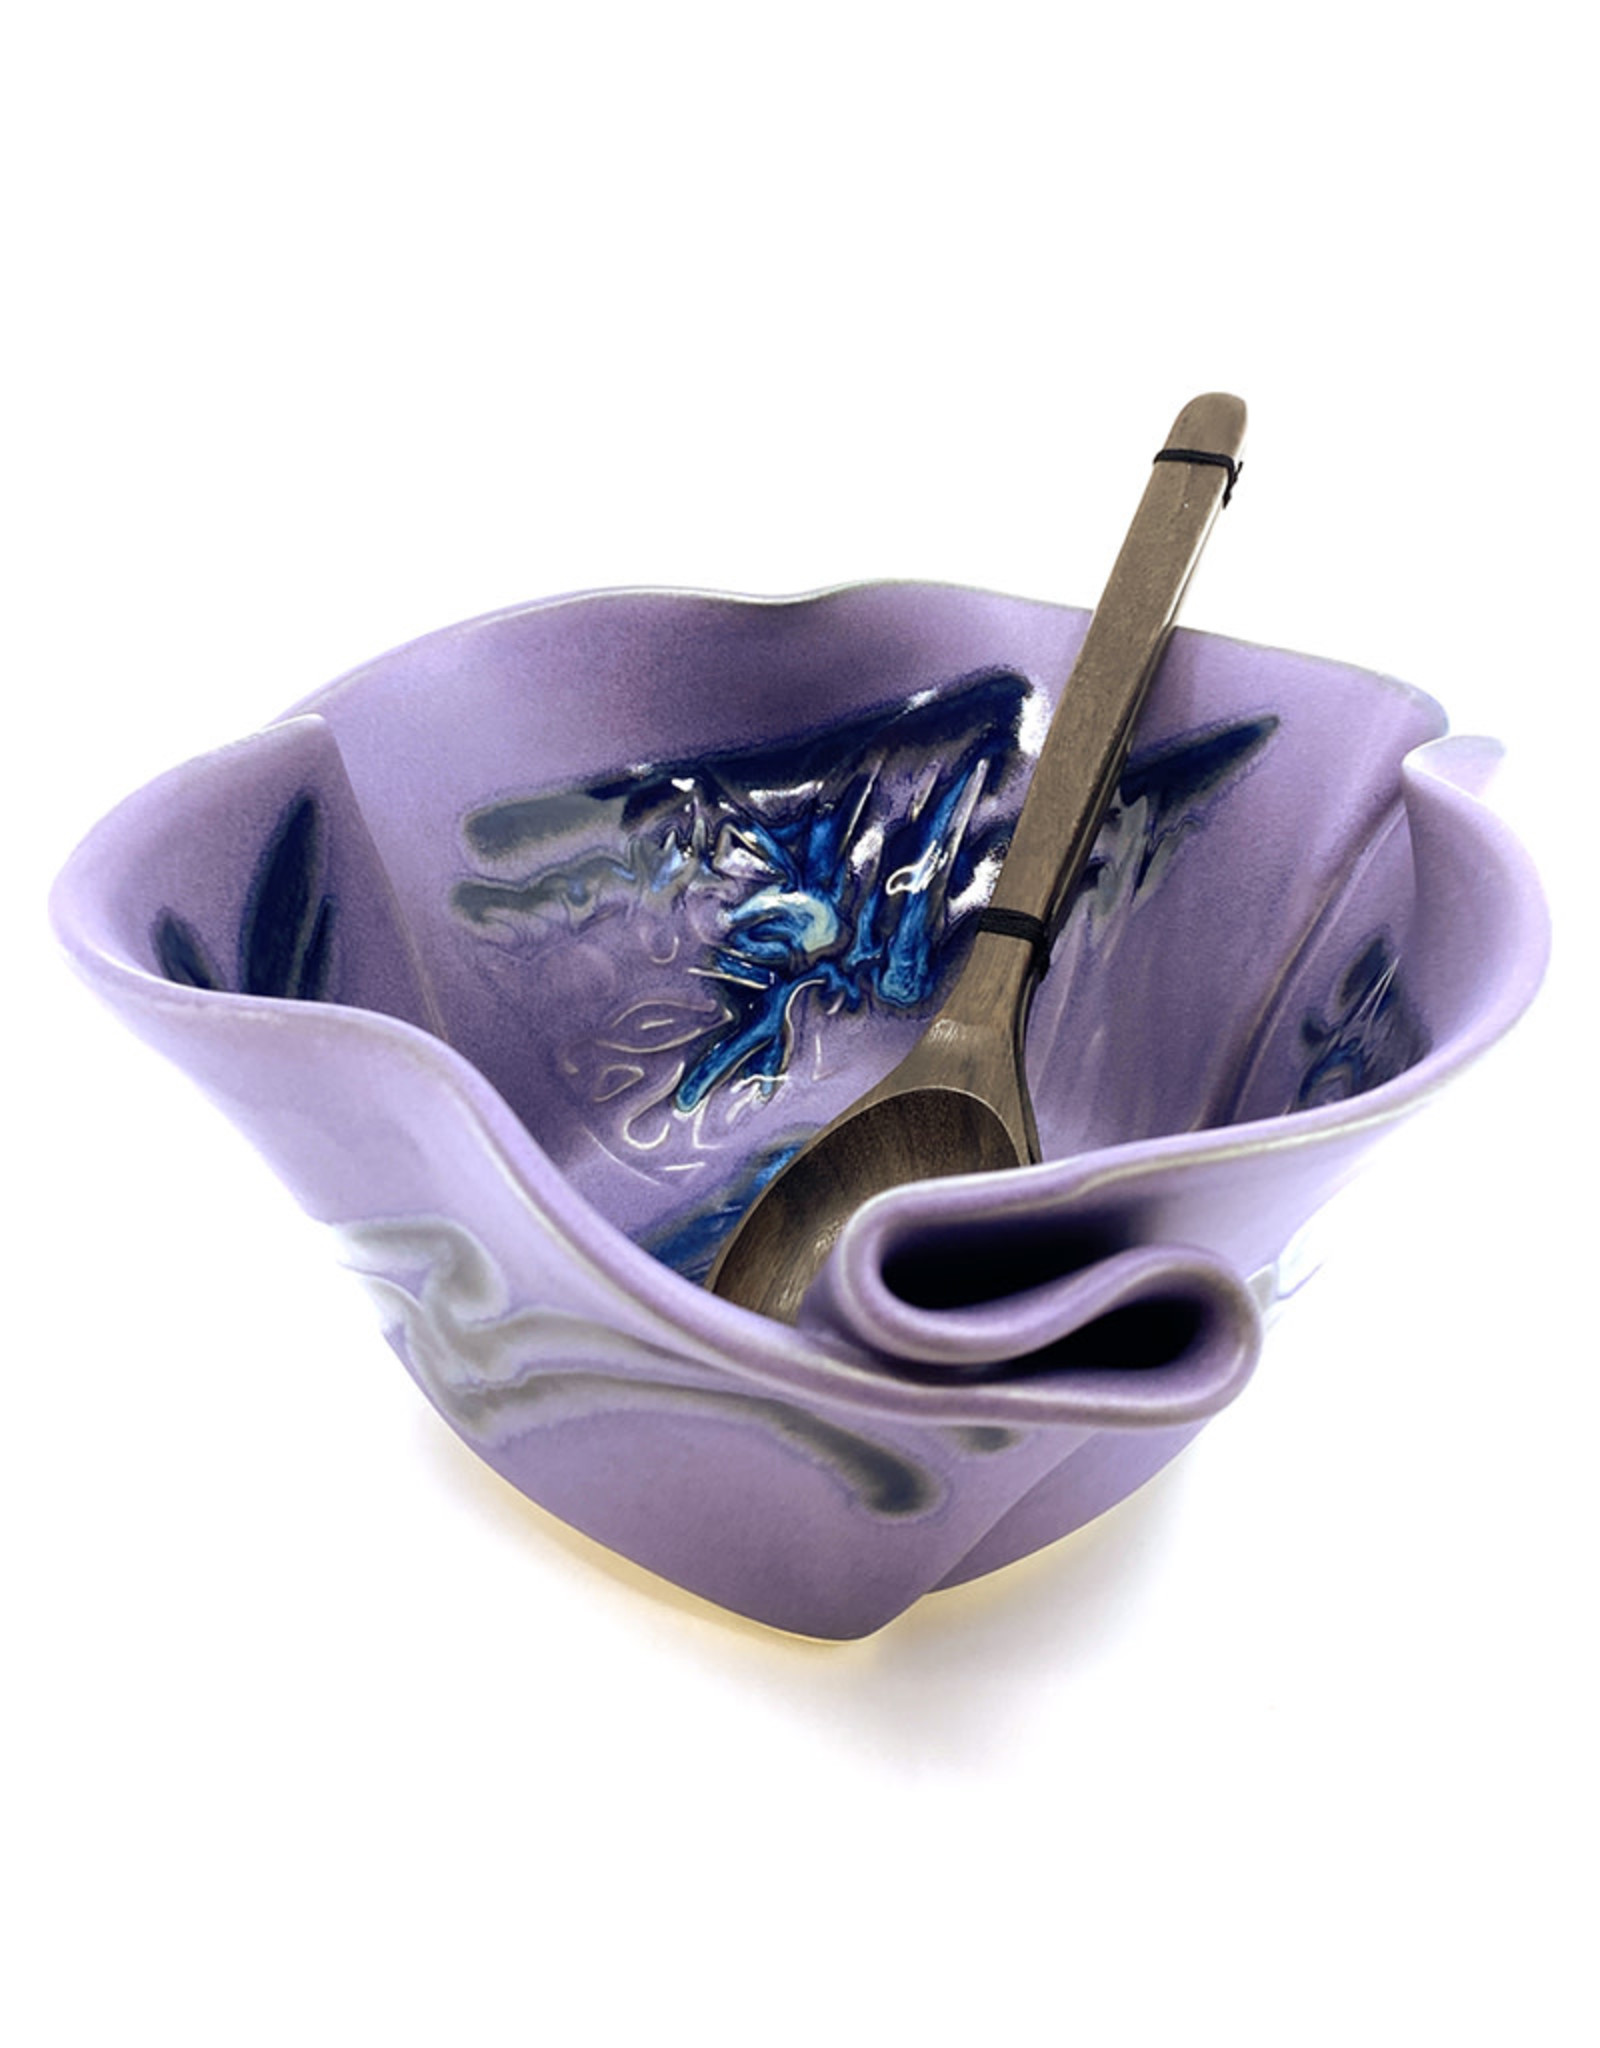 HILBORN POTTERY PERIWINKLE SERVING BOWL FOR FUNKY FOOD WITH SERVERS